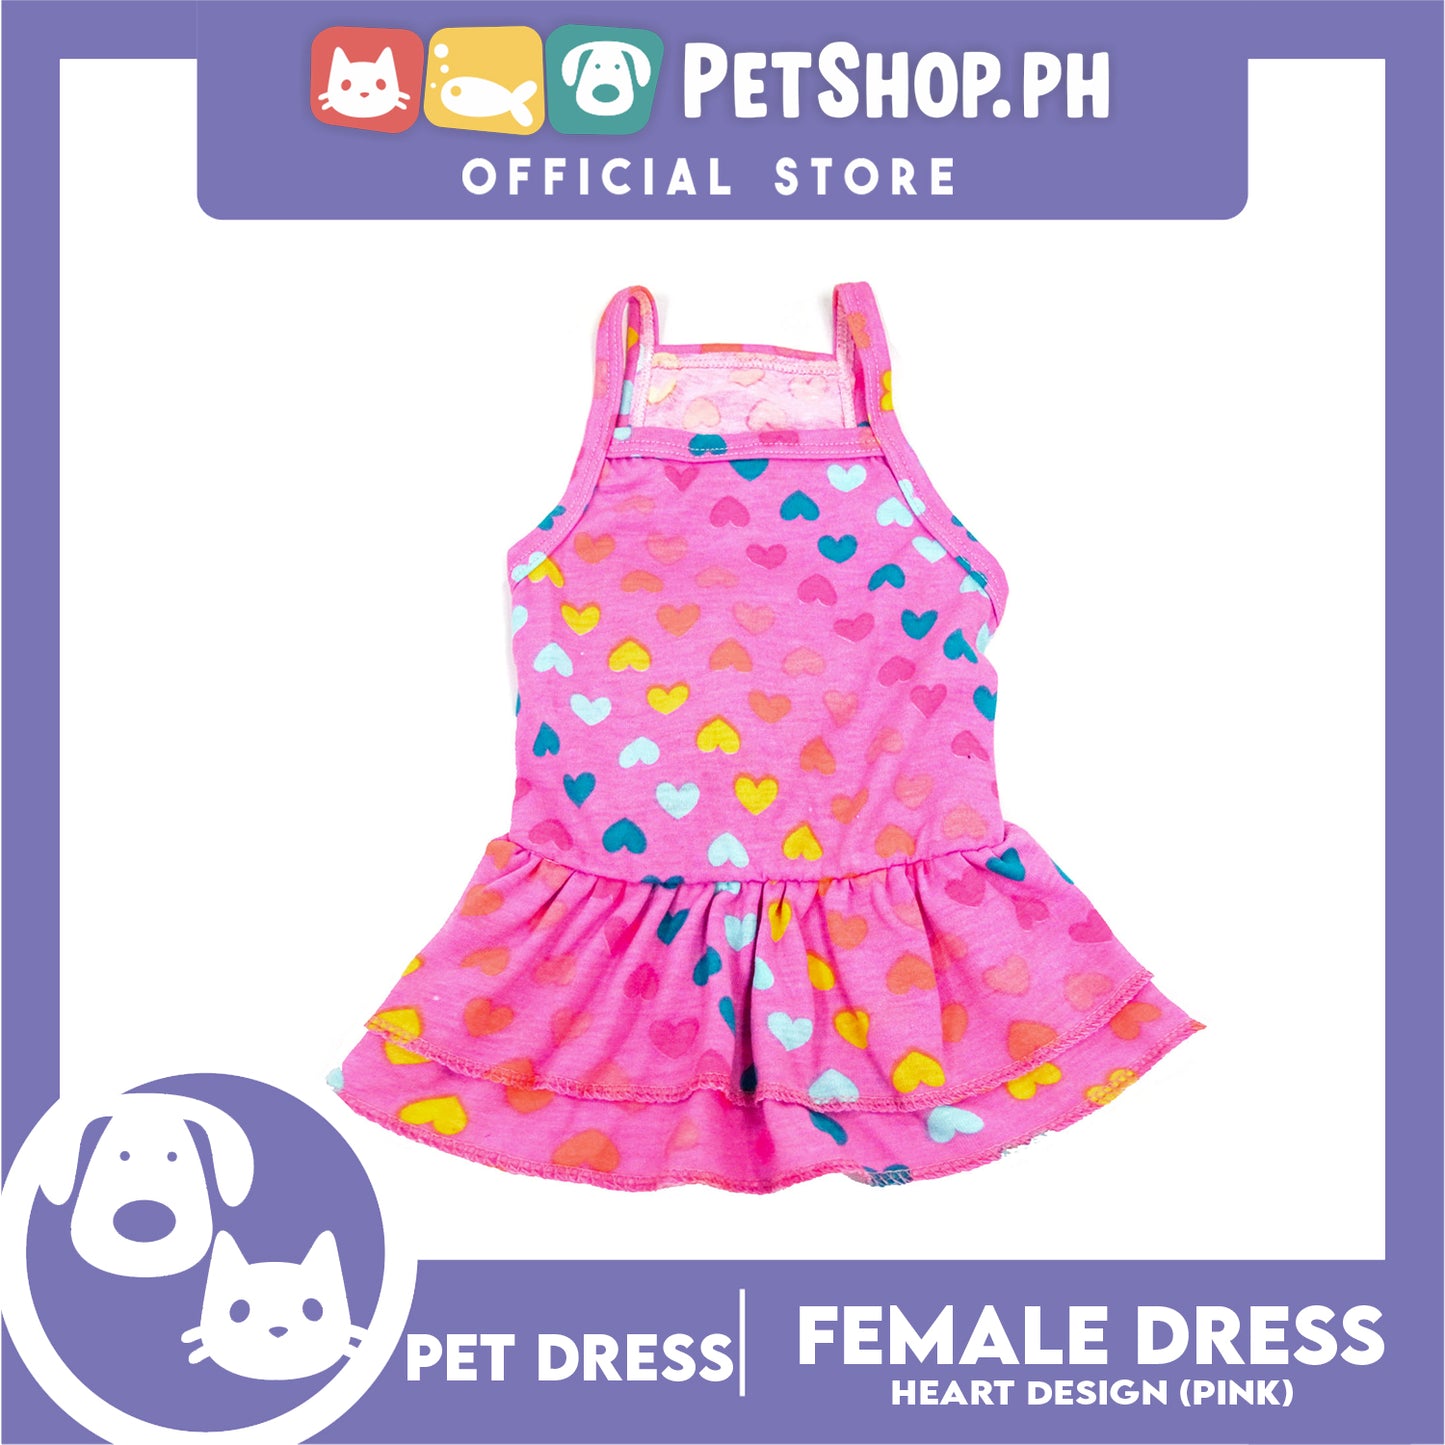 Pet Shirt Purple Dress Sando Shirt with Heart Design (Medium) Perfect Fit for Dogs and Cats Cloth